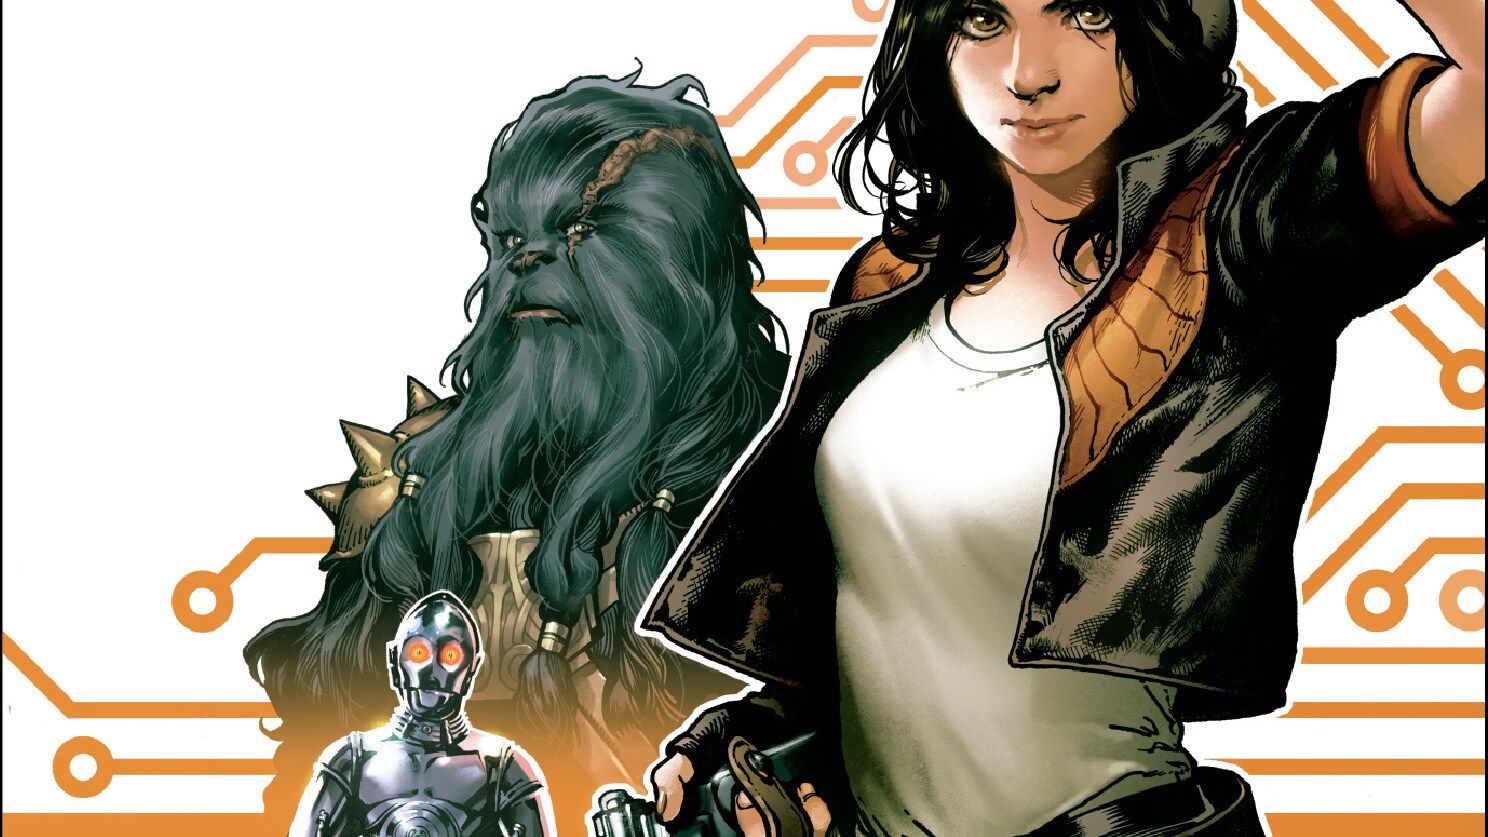 The Doctor Is In: New Doctor Aphra Ongoing Series Coming This December - Exclusive